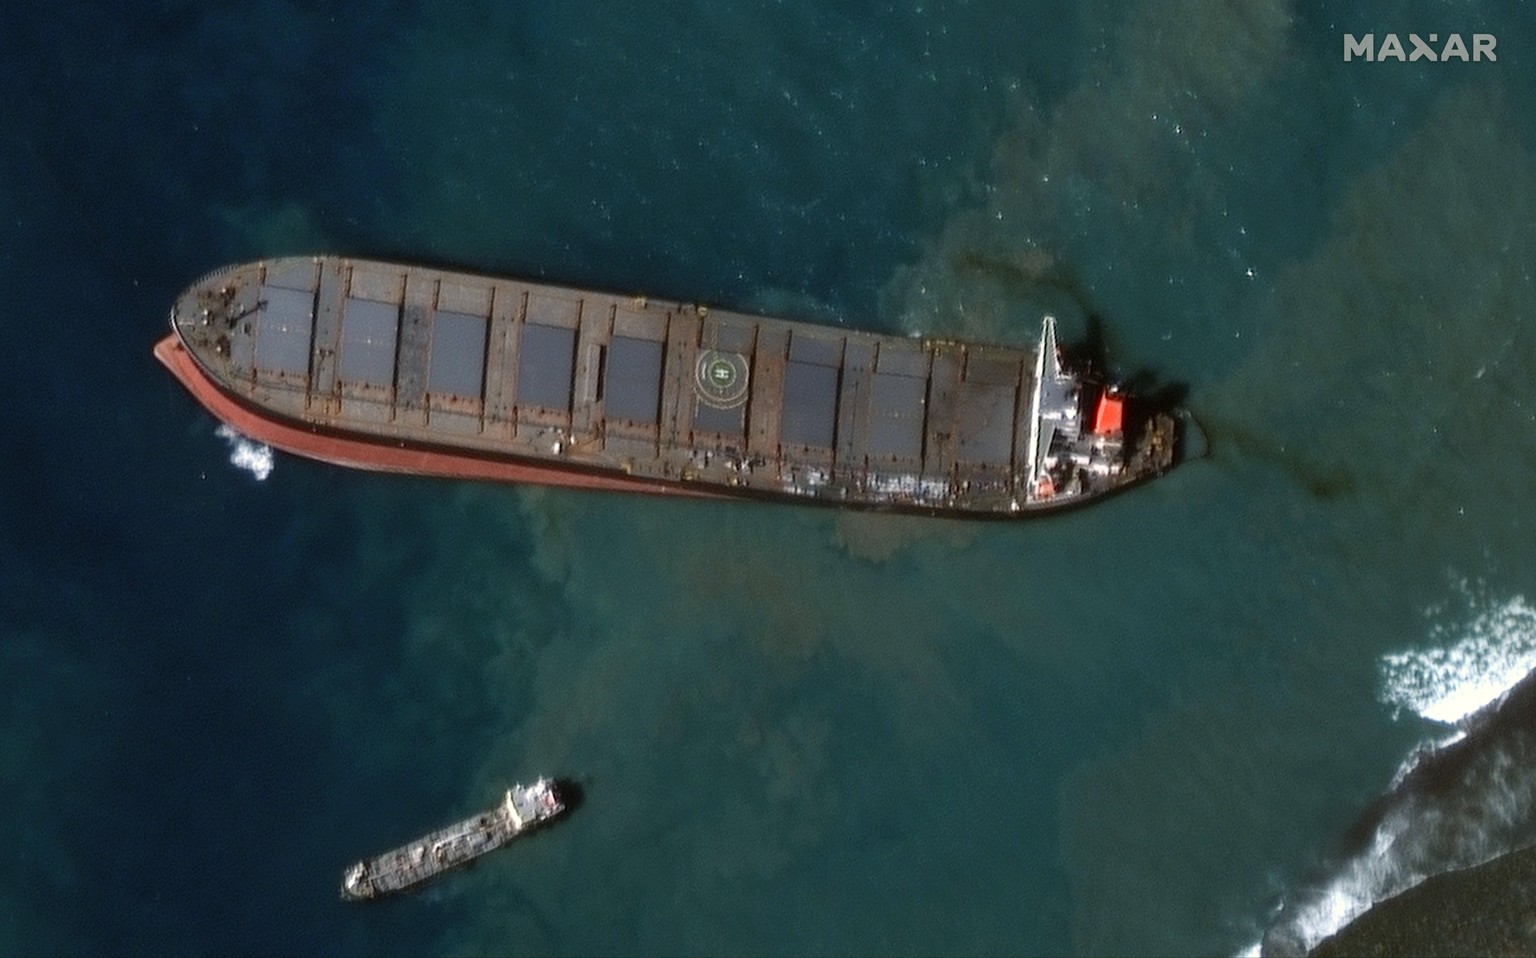 August 12, 2020, Pointe d Esny, Mauritius: Satellite imagery of the MV Wahashio shipwreck off the southeast coast of Mauritius, showing efforts to contain the oil from the ship as well as multiple loc ...